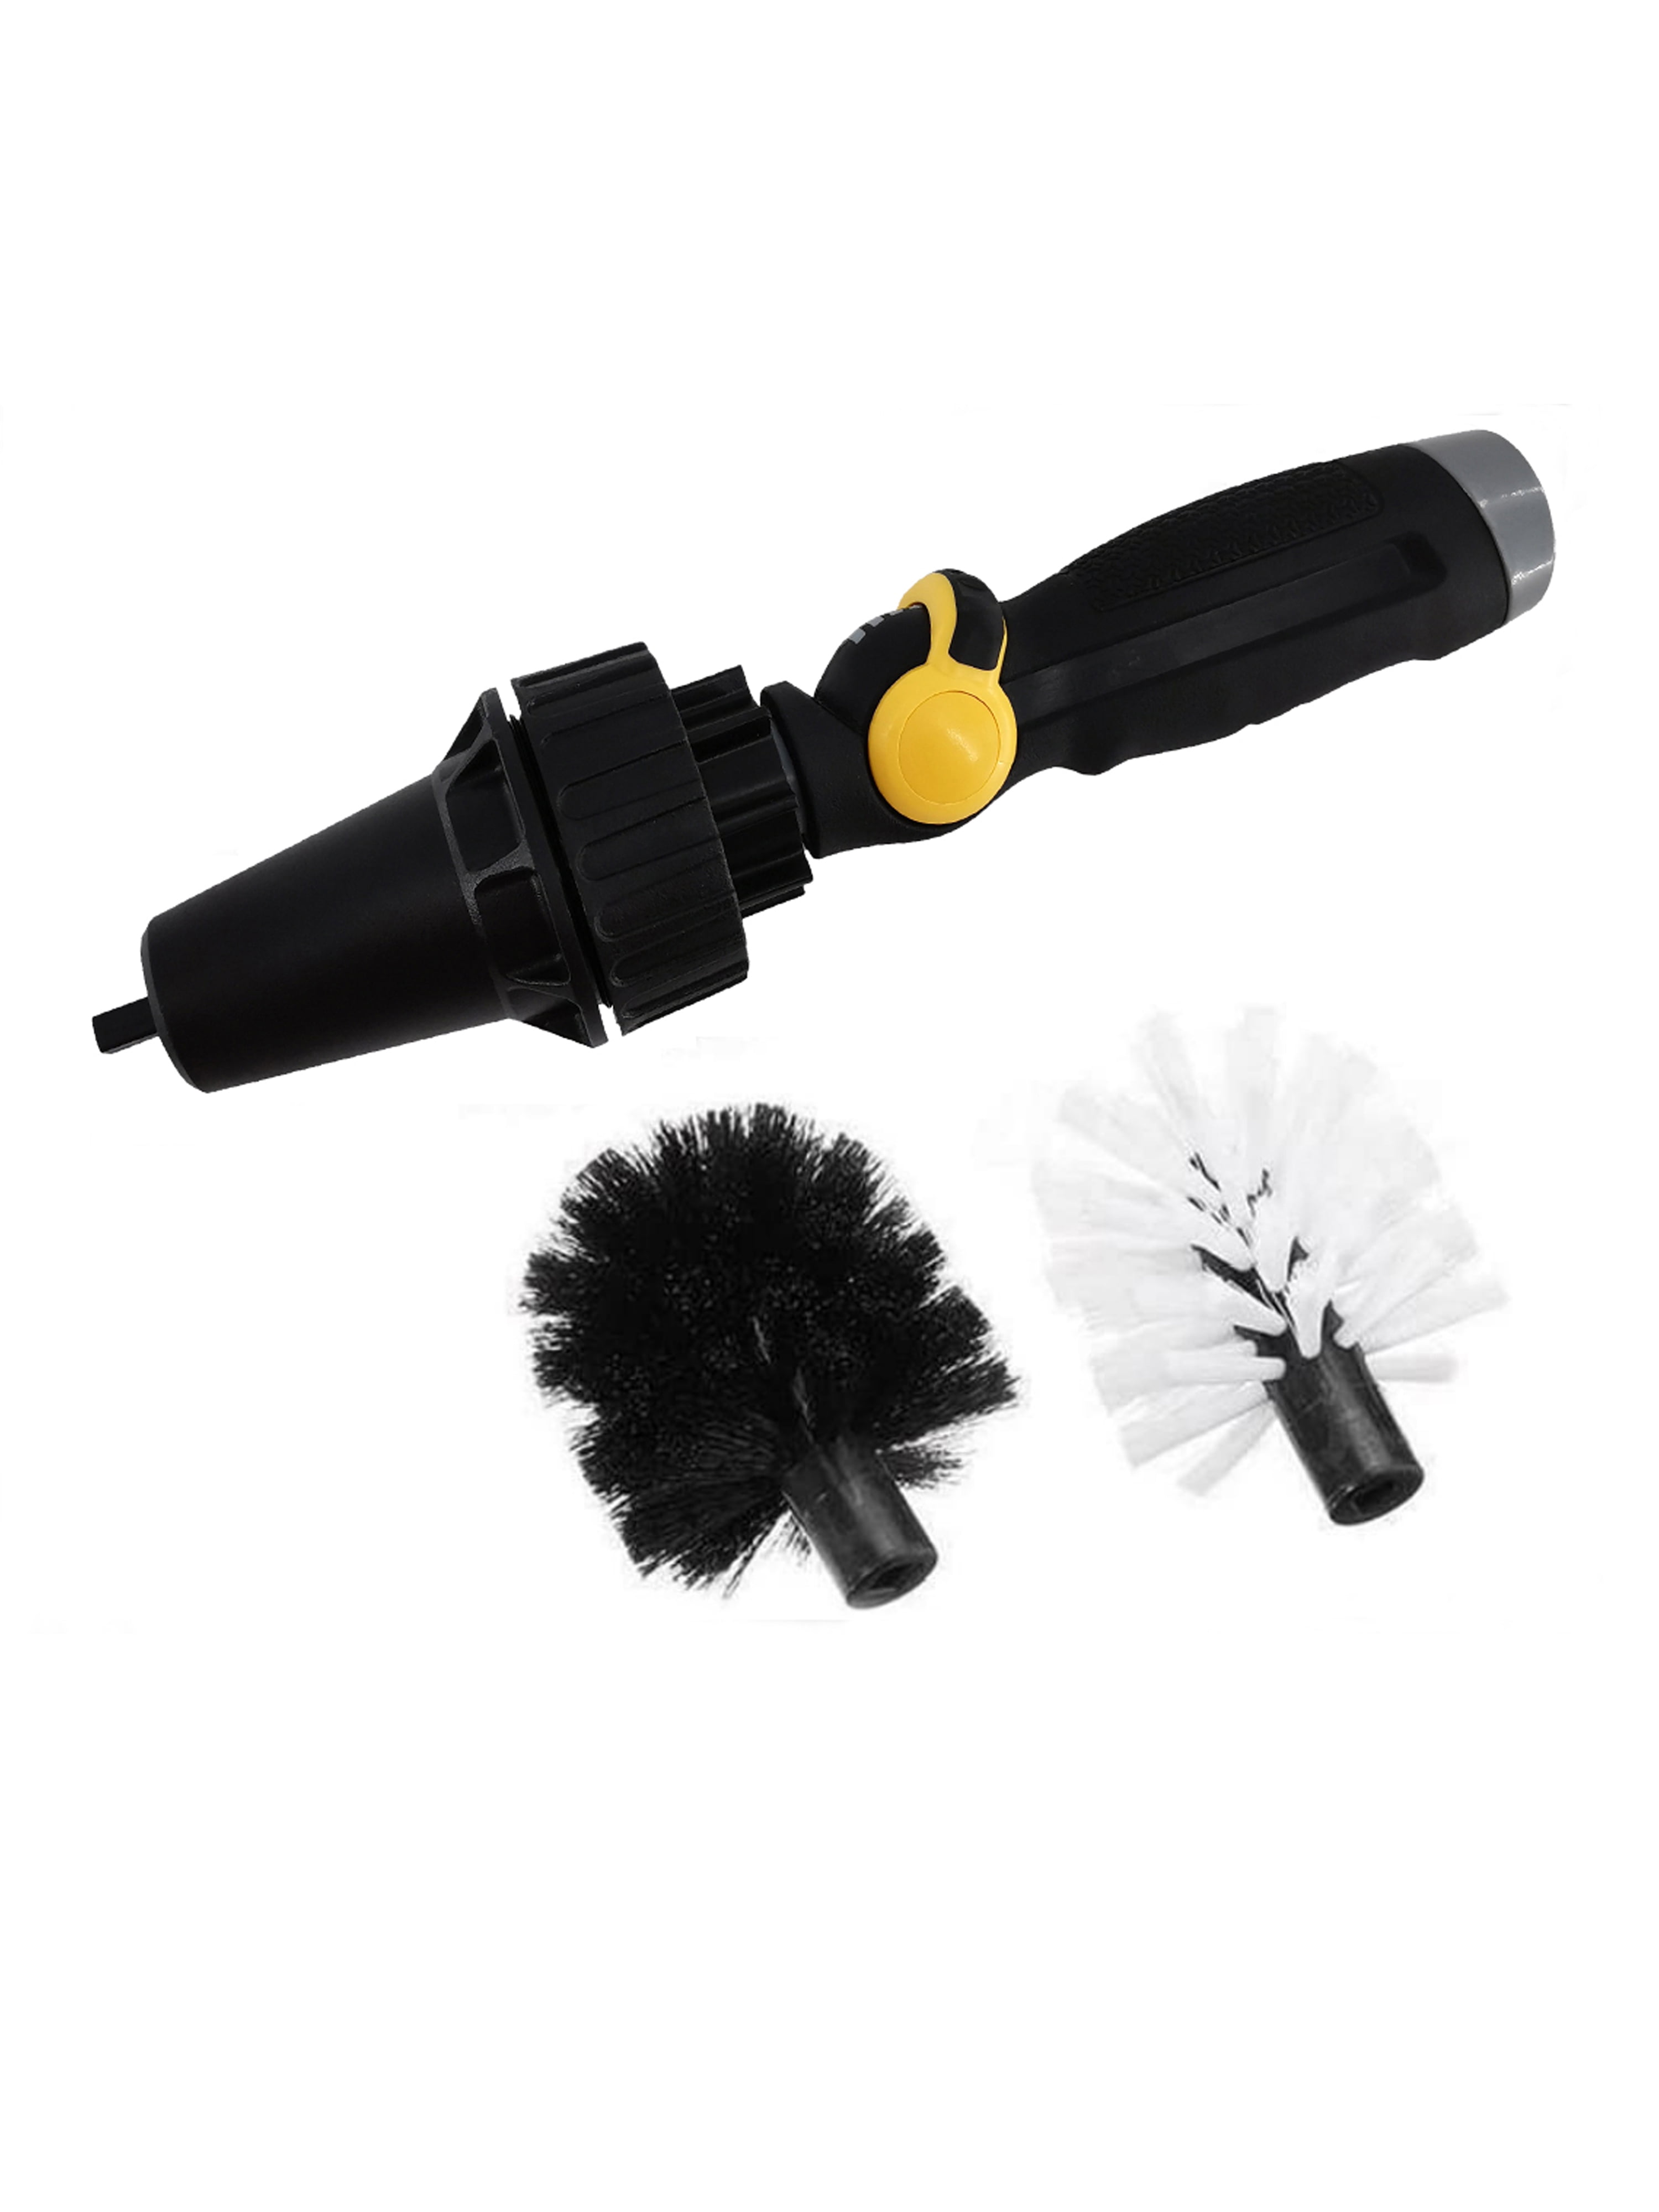 Auto Drive Brand Rotatable Water-Powered Form Brush for Car Cleaning and Household Cleaning